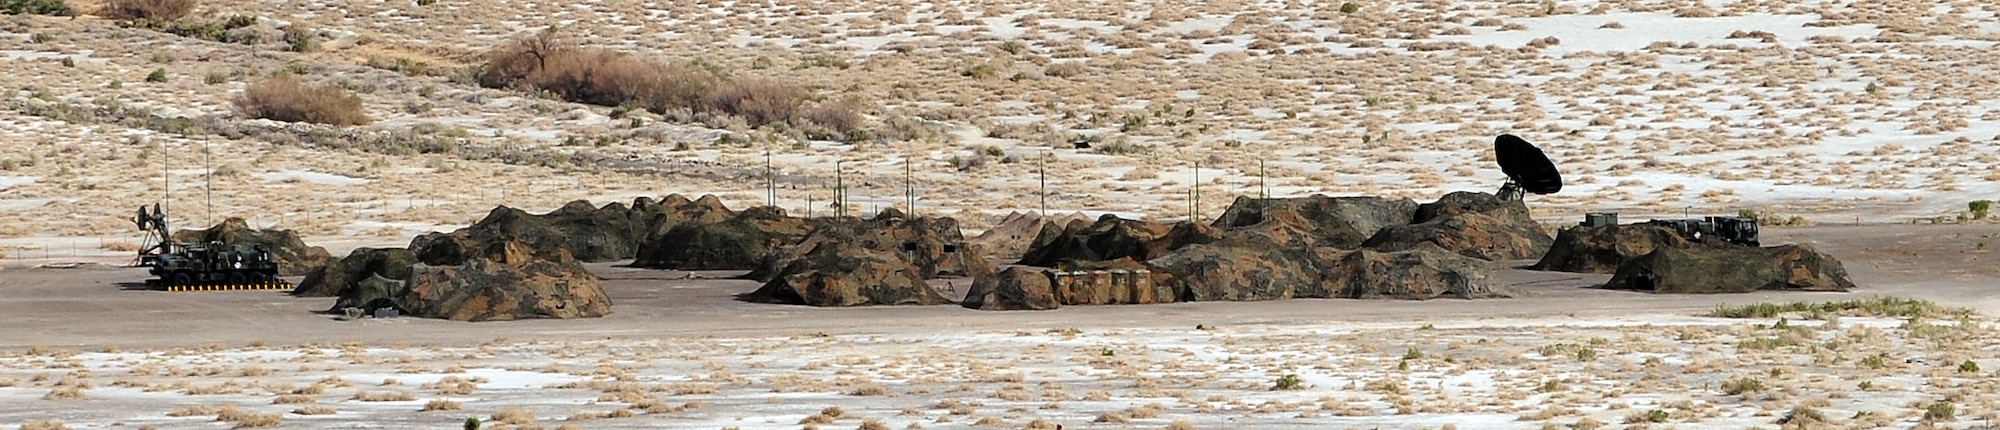 WENDOVER, Utah -- The 726th Air Control Squadron compound sits hidden by camouflage netting during a week-long exercise in Wendover, Utah, during a week-long training exercise. The 726th ACS tackles a wide-spread mission including enemy surveillance and identification, weapons control, joint and combined data-link connectivity, and battle management of offensive and defensive air activities. The squadron is made up of 27 different Air Force career fields, making it self-sustaining and able to deploy and fully operate without external support or help. (U.S. Air Force photo\Airman 1st Class Debbie Lockhart)